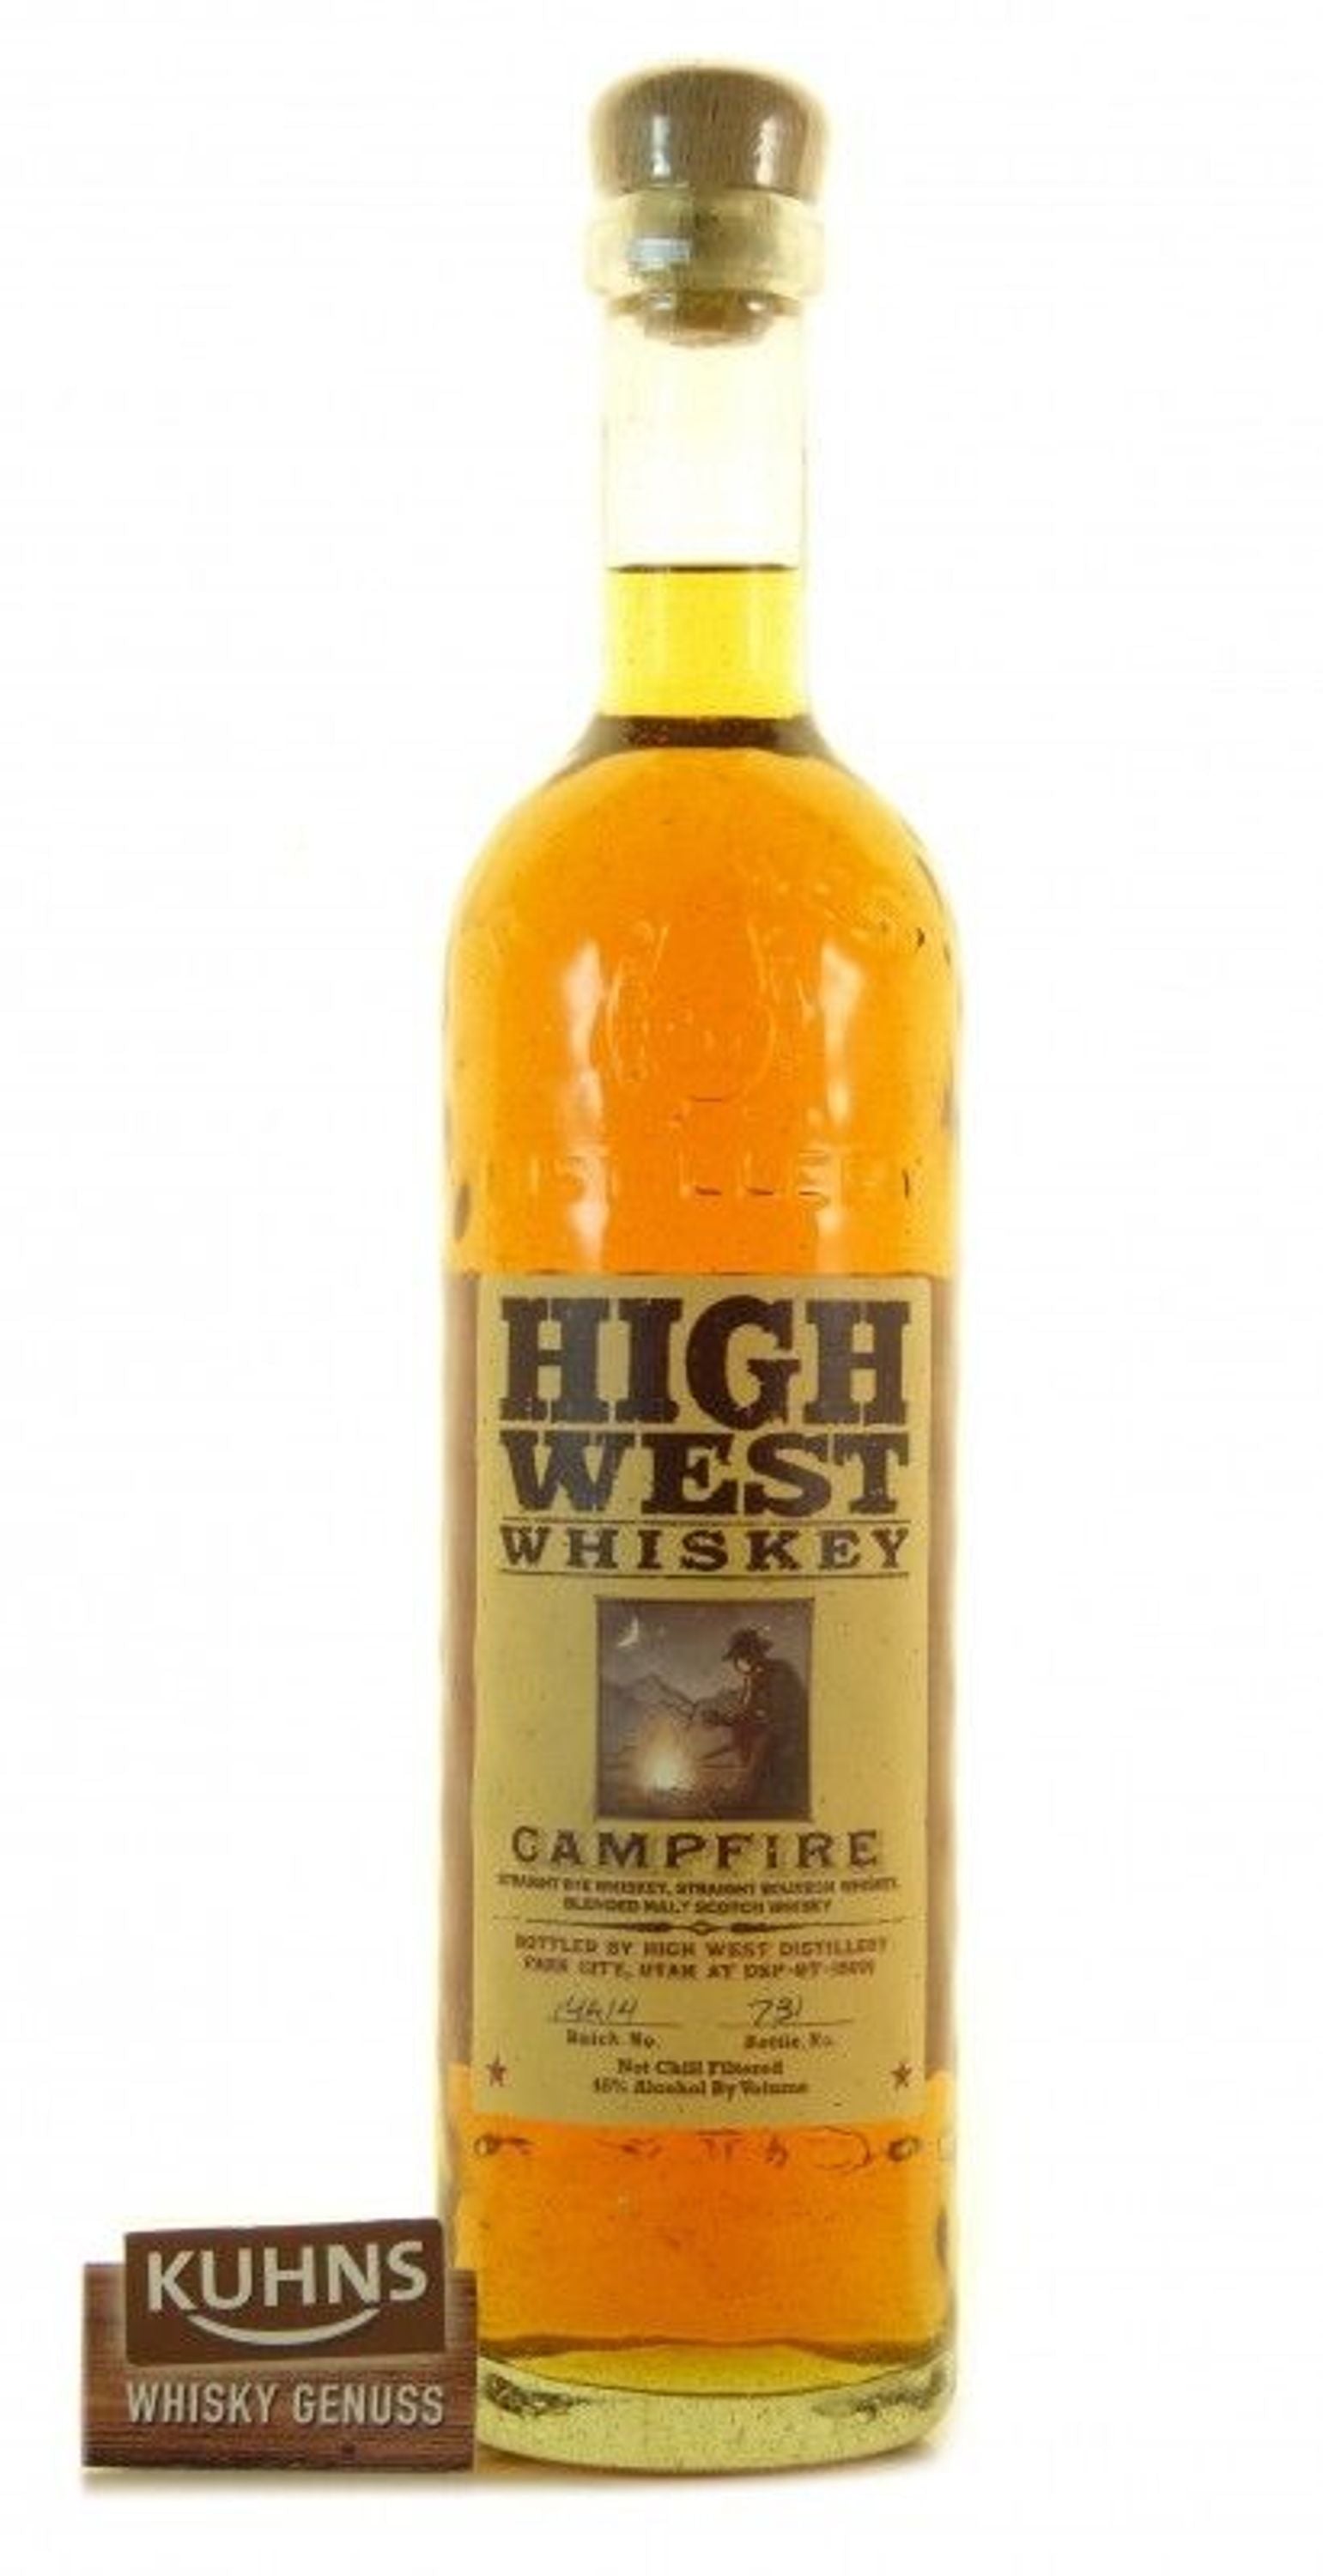 High West Campfire Whiskey 0.7l, alc. 46% ABV, USA Blended Whiskey